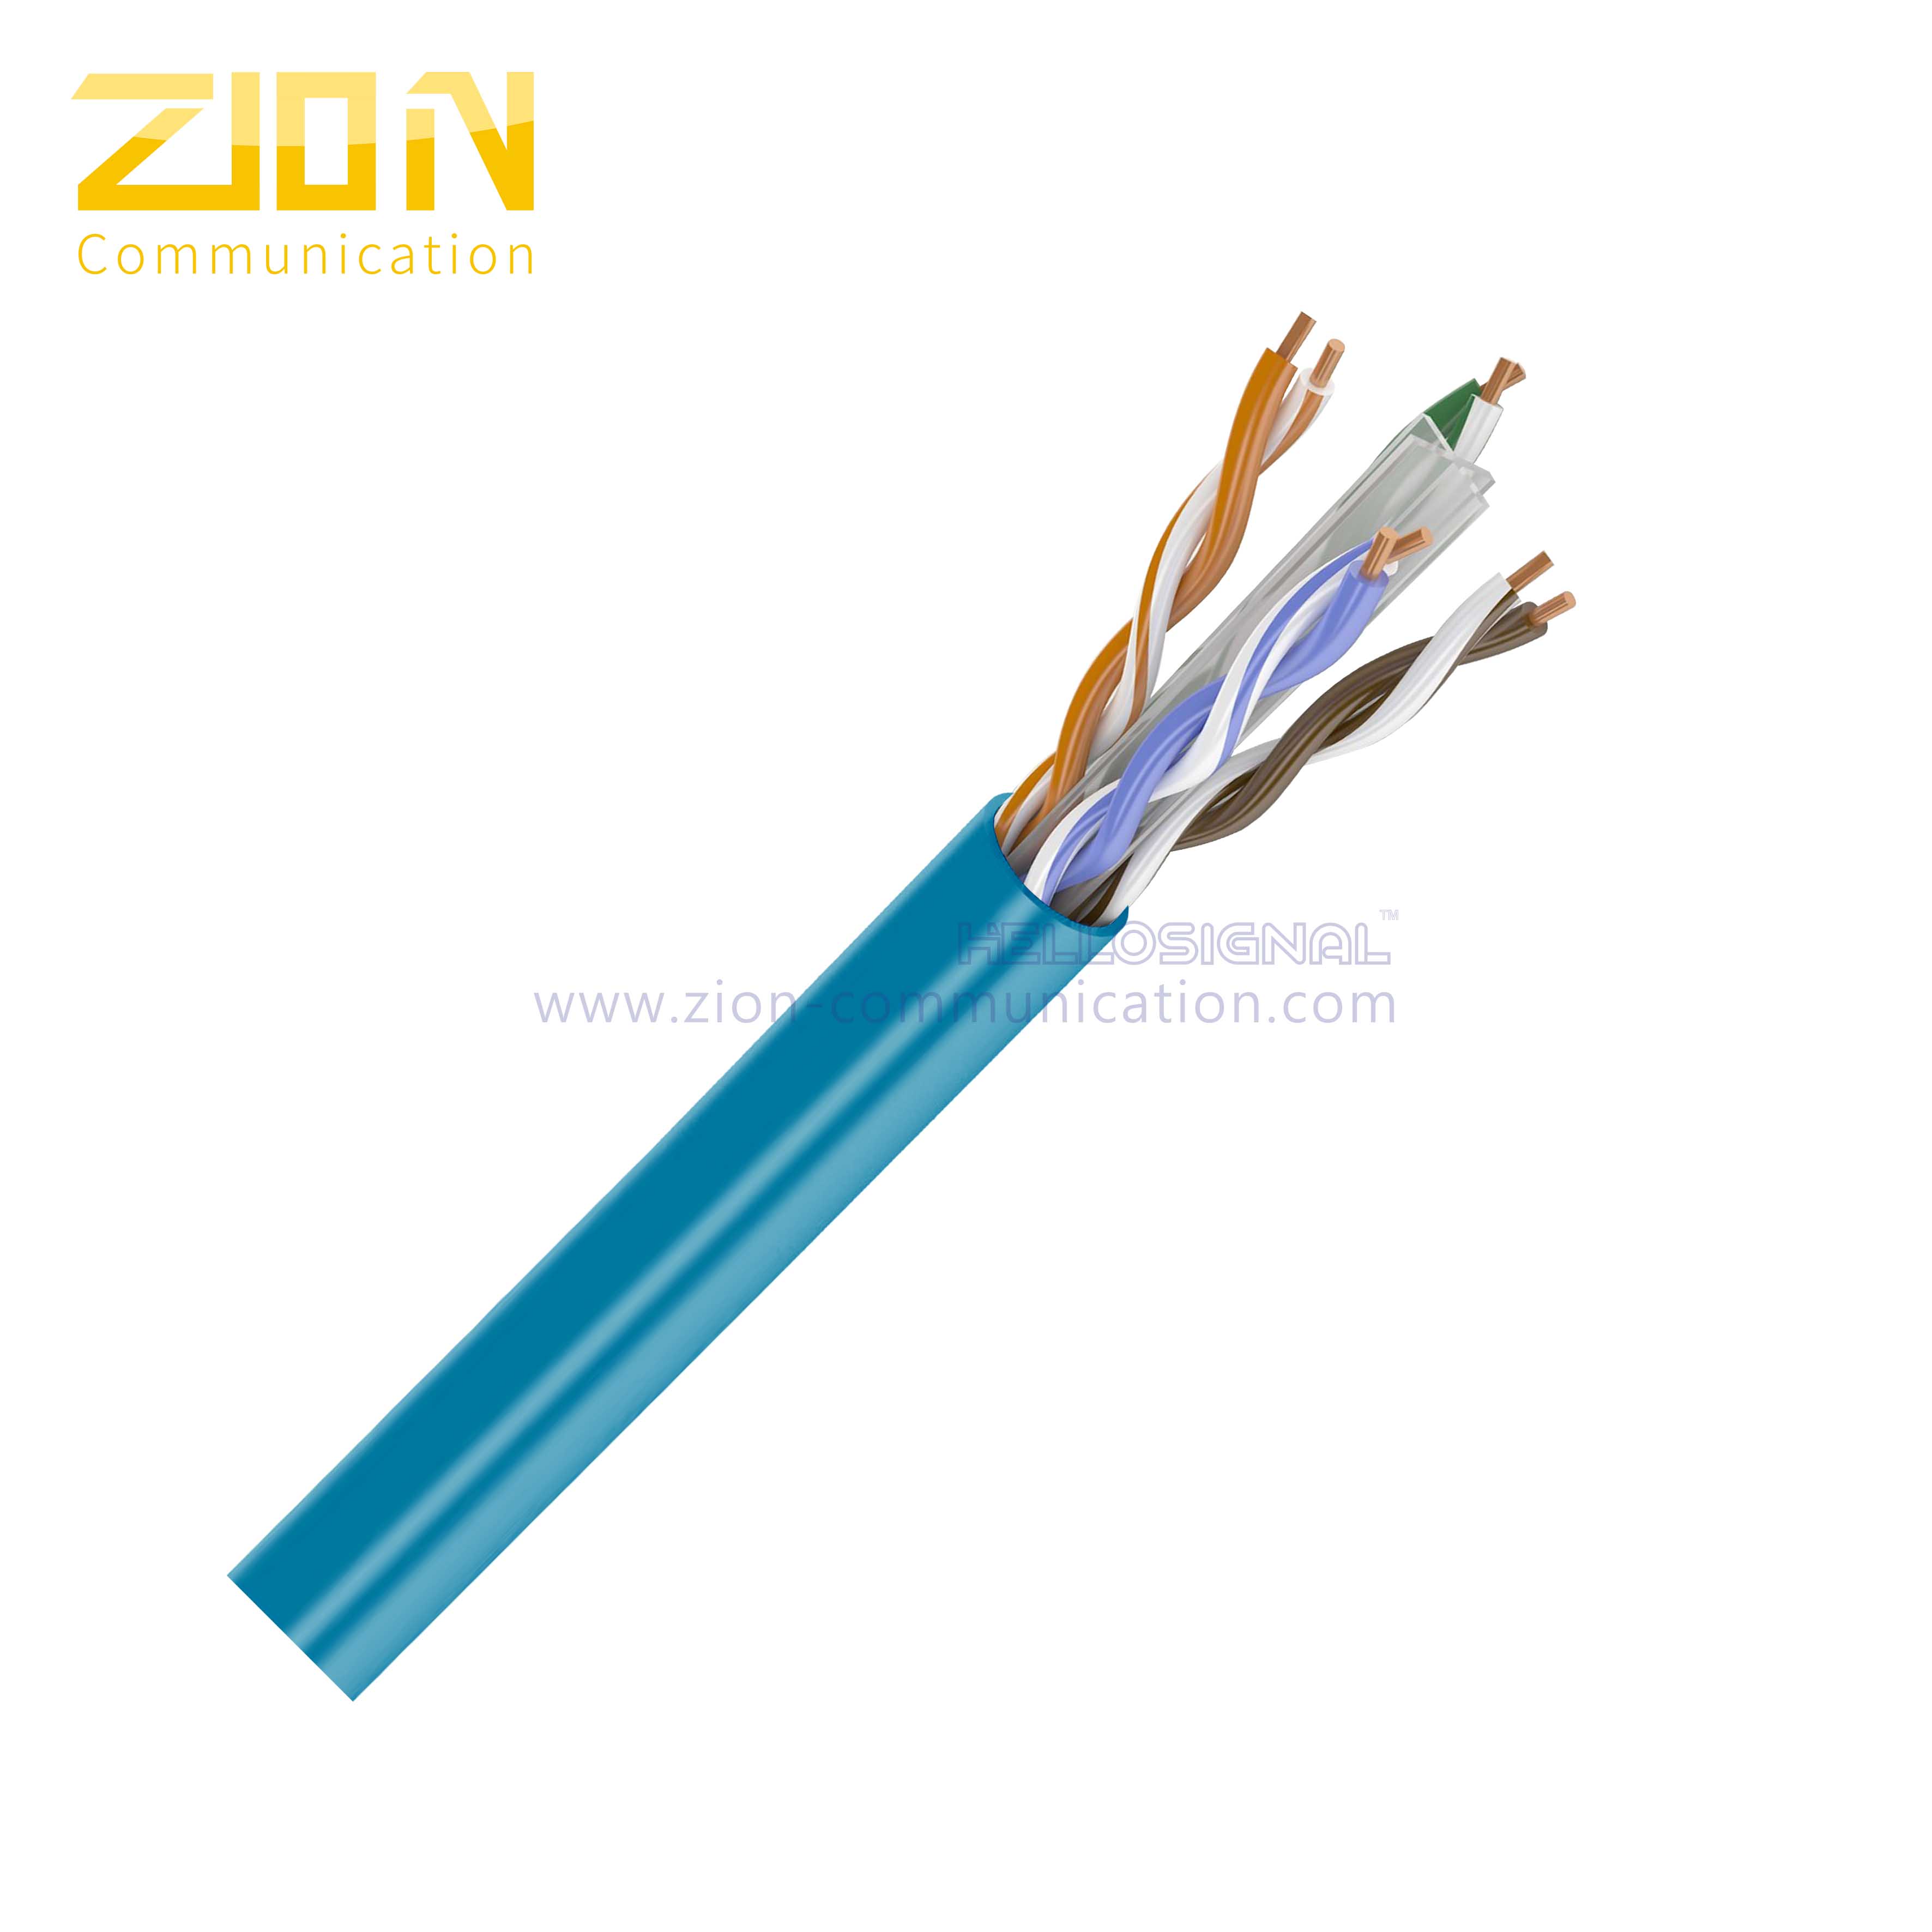 U/UTP CAT6 4PR 23AWG Cable from manufacturer Zion Communication